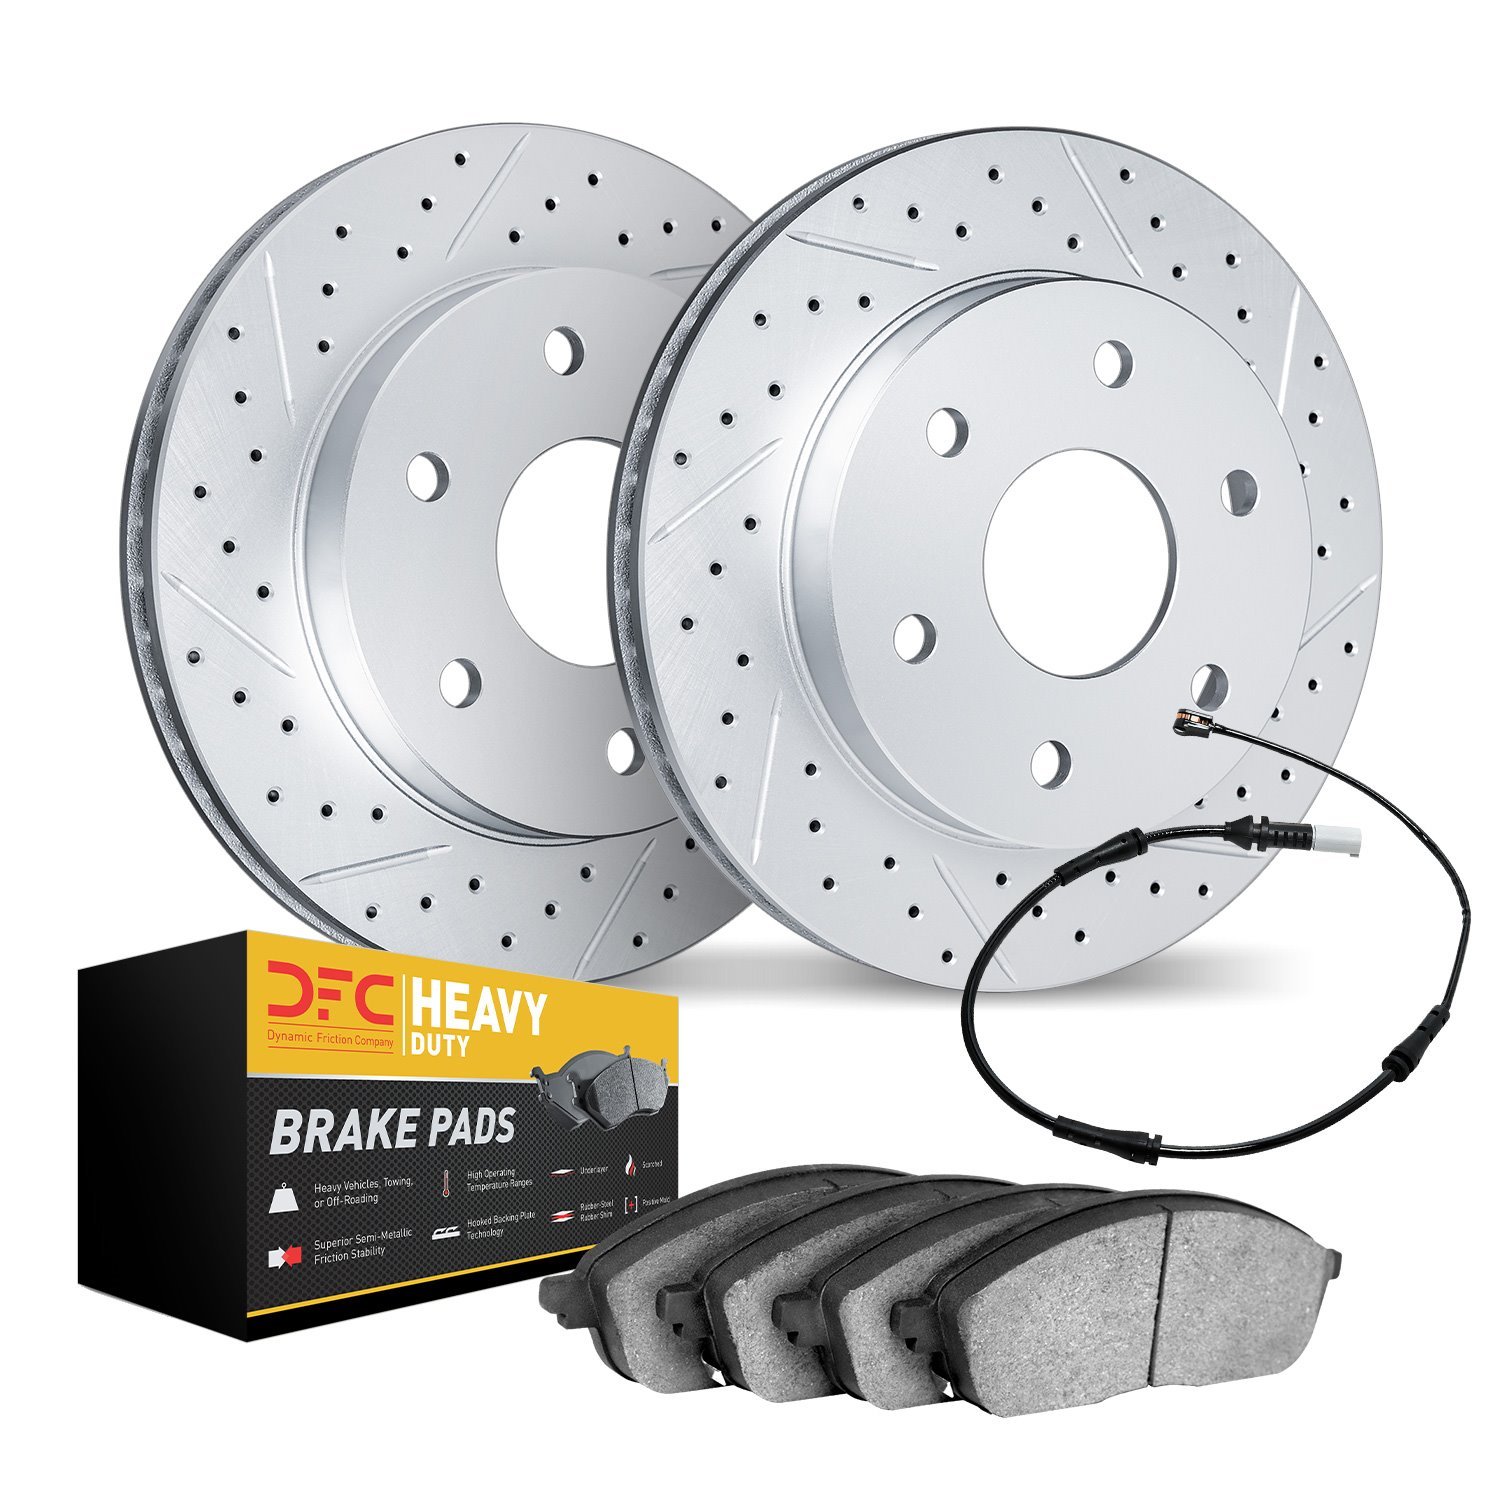 2232-40001 Geoperformance Drilled/Slotted Rotors w/Heavy-Duty Pads Kit & Sensor, 2002-2006 Multiple Makes/Models, Position: Rear